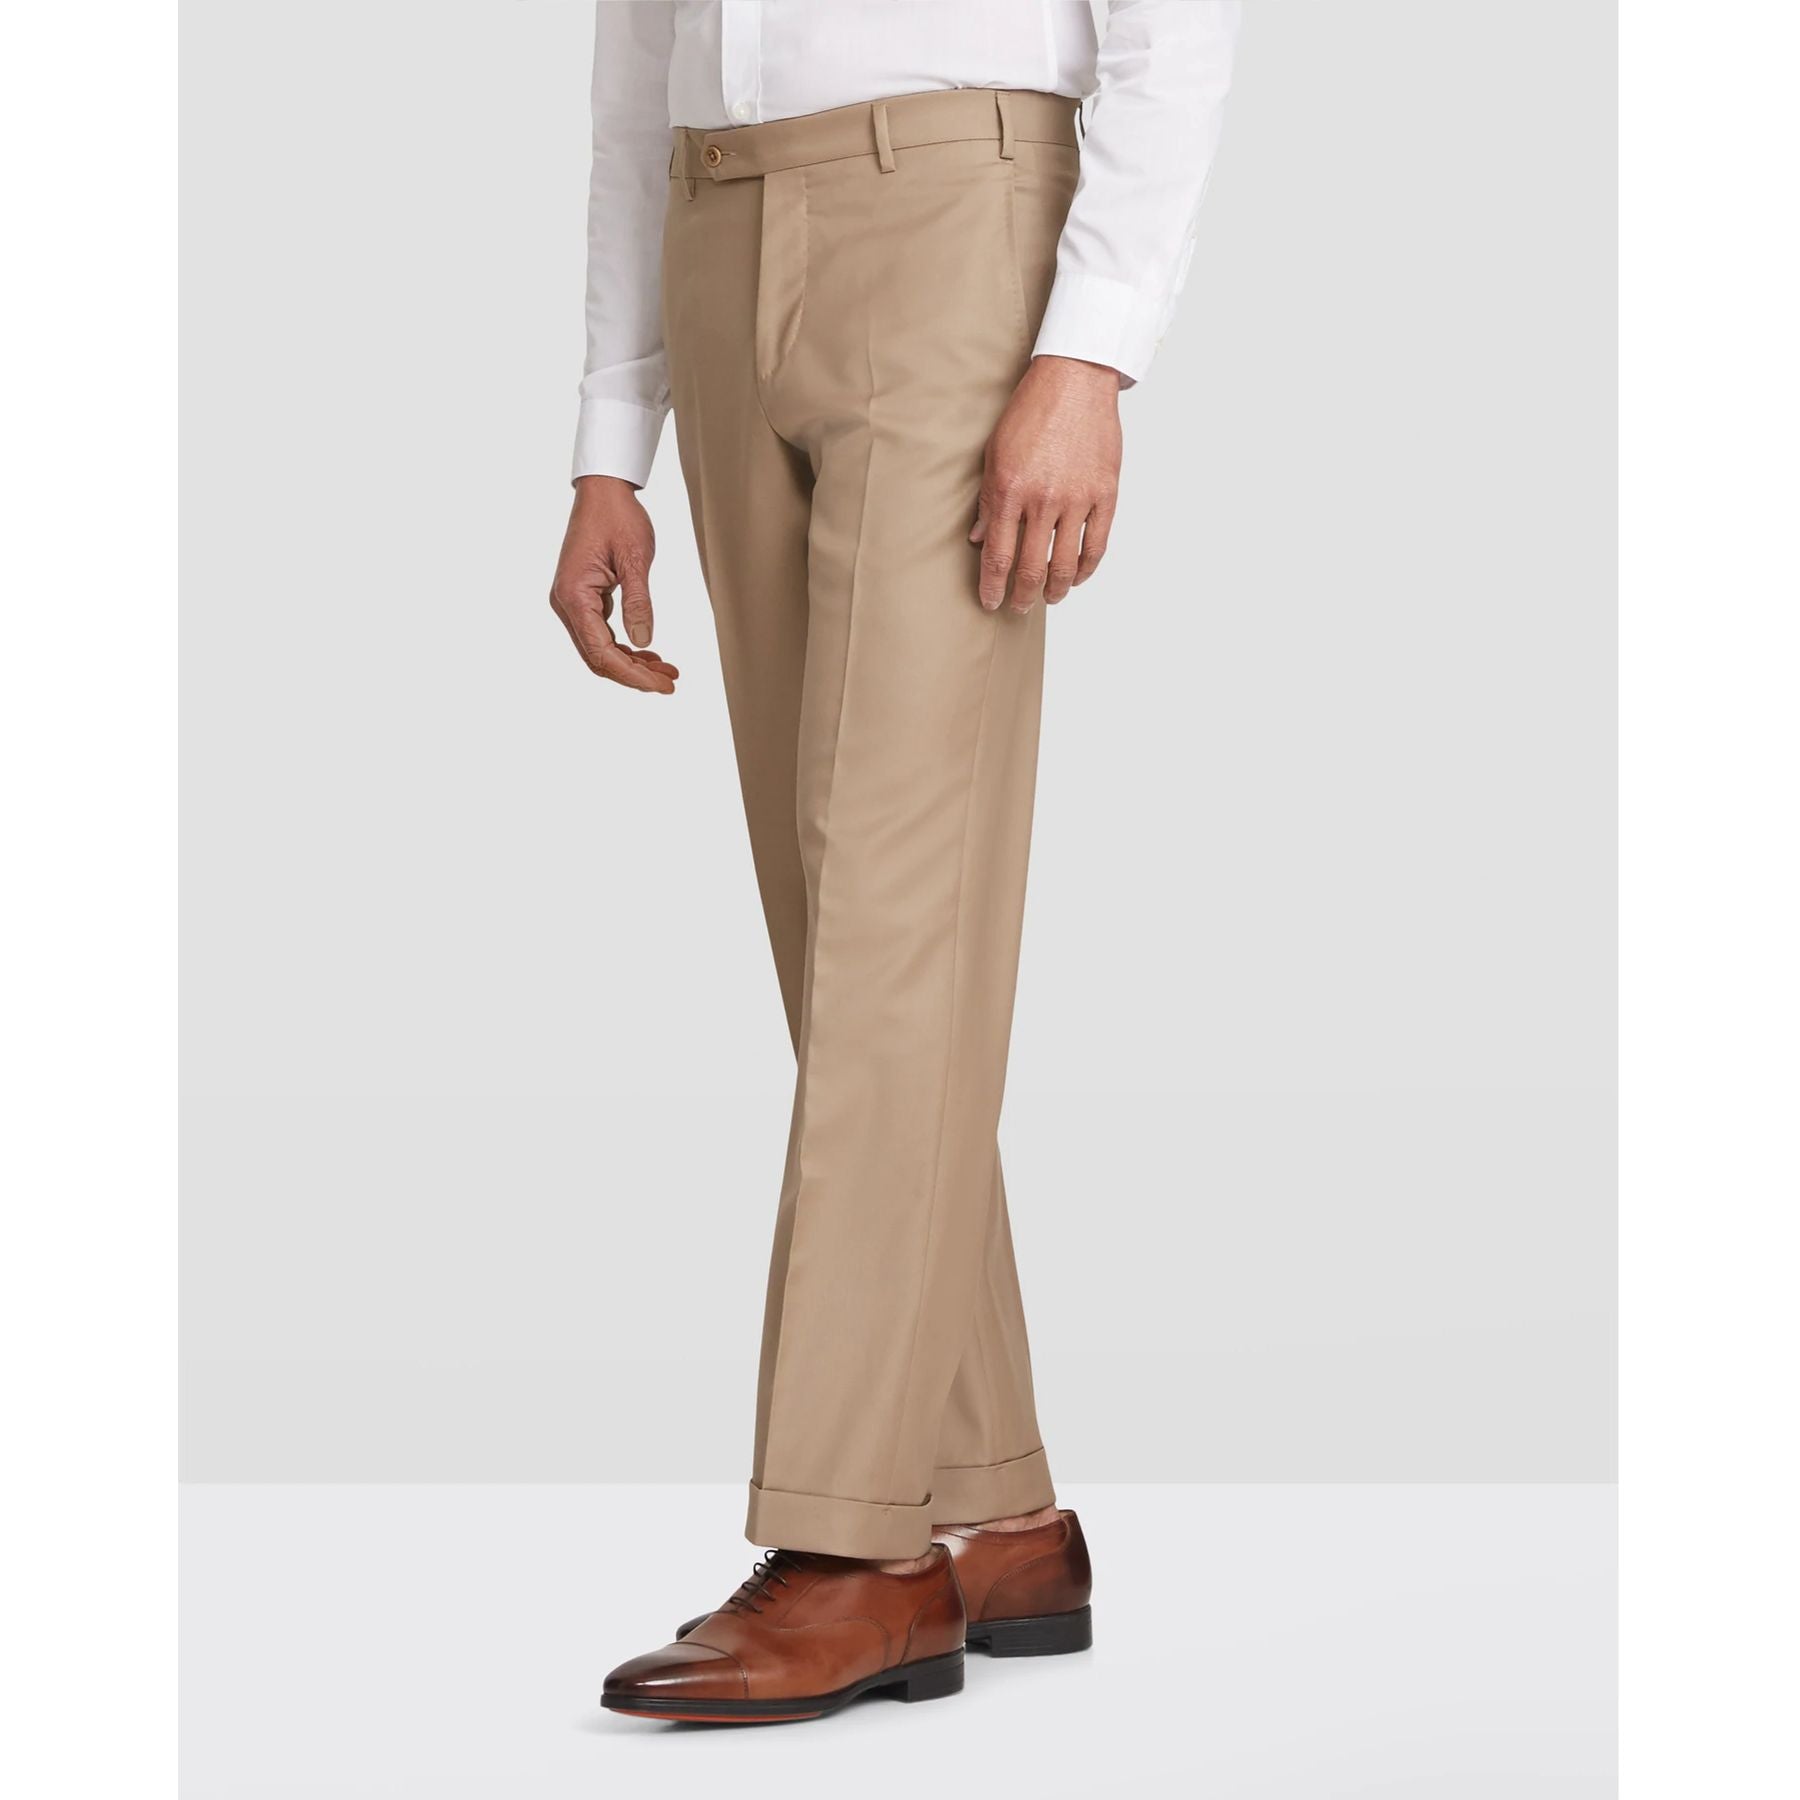 Buy BLACKBERRYS Natural Structured Polyester Blend Slim Fit Men's Casual  Trousers | Shoppers Stop